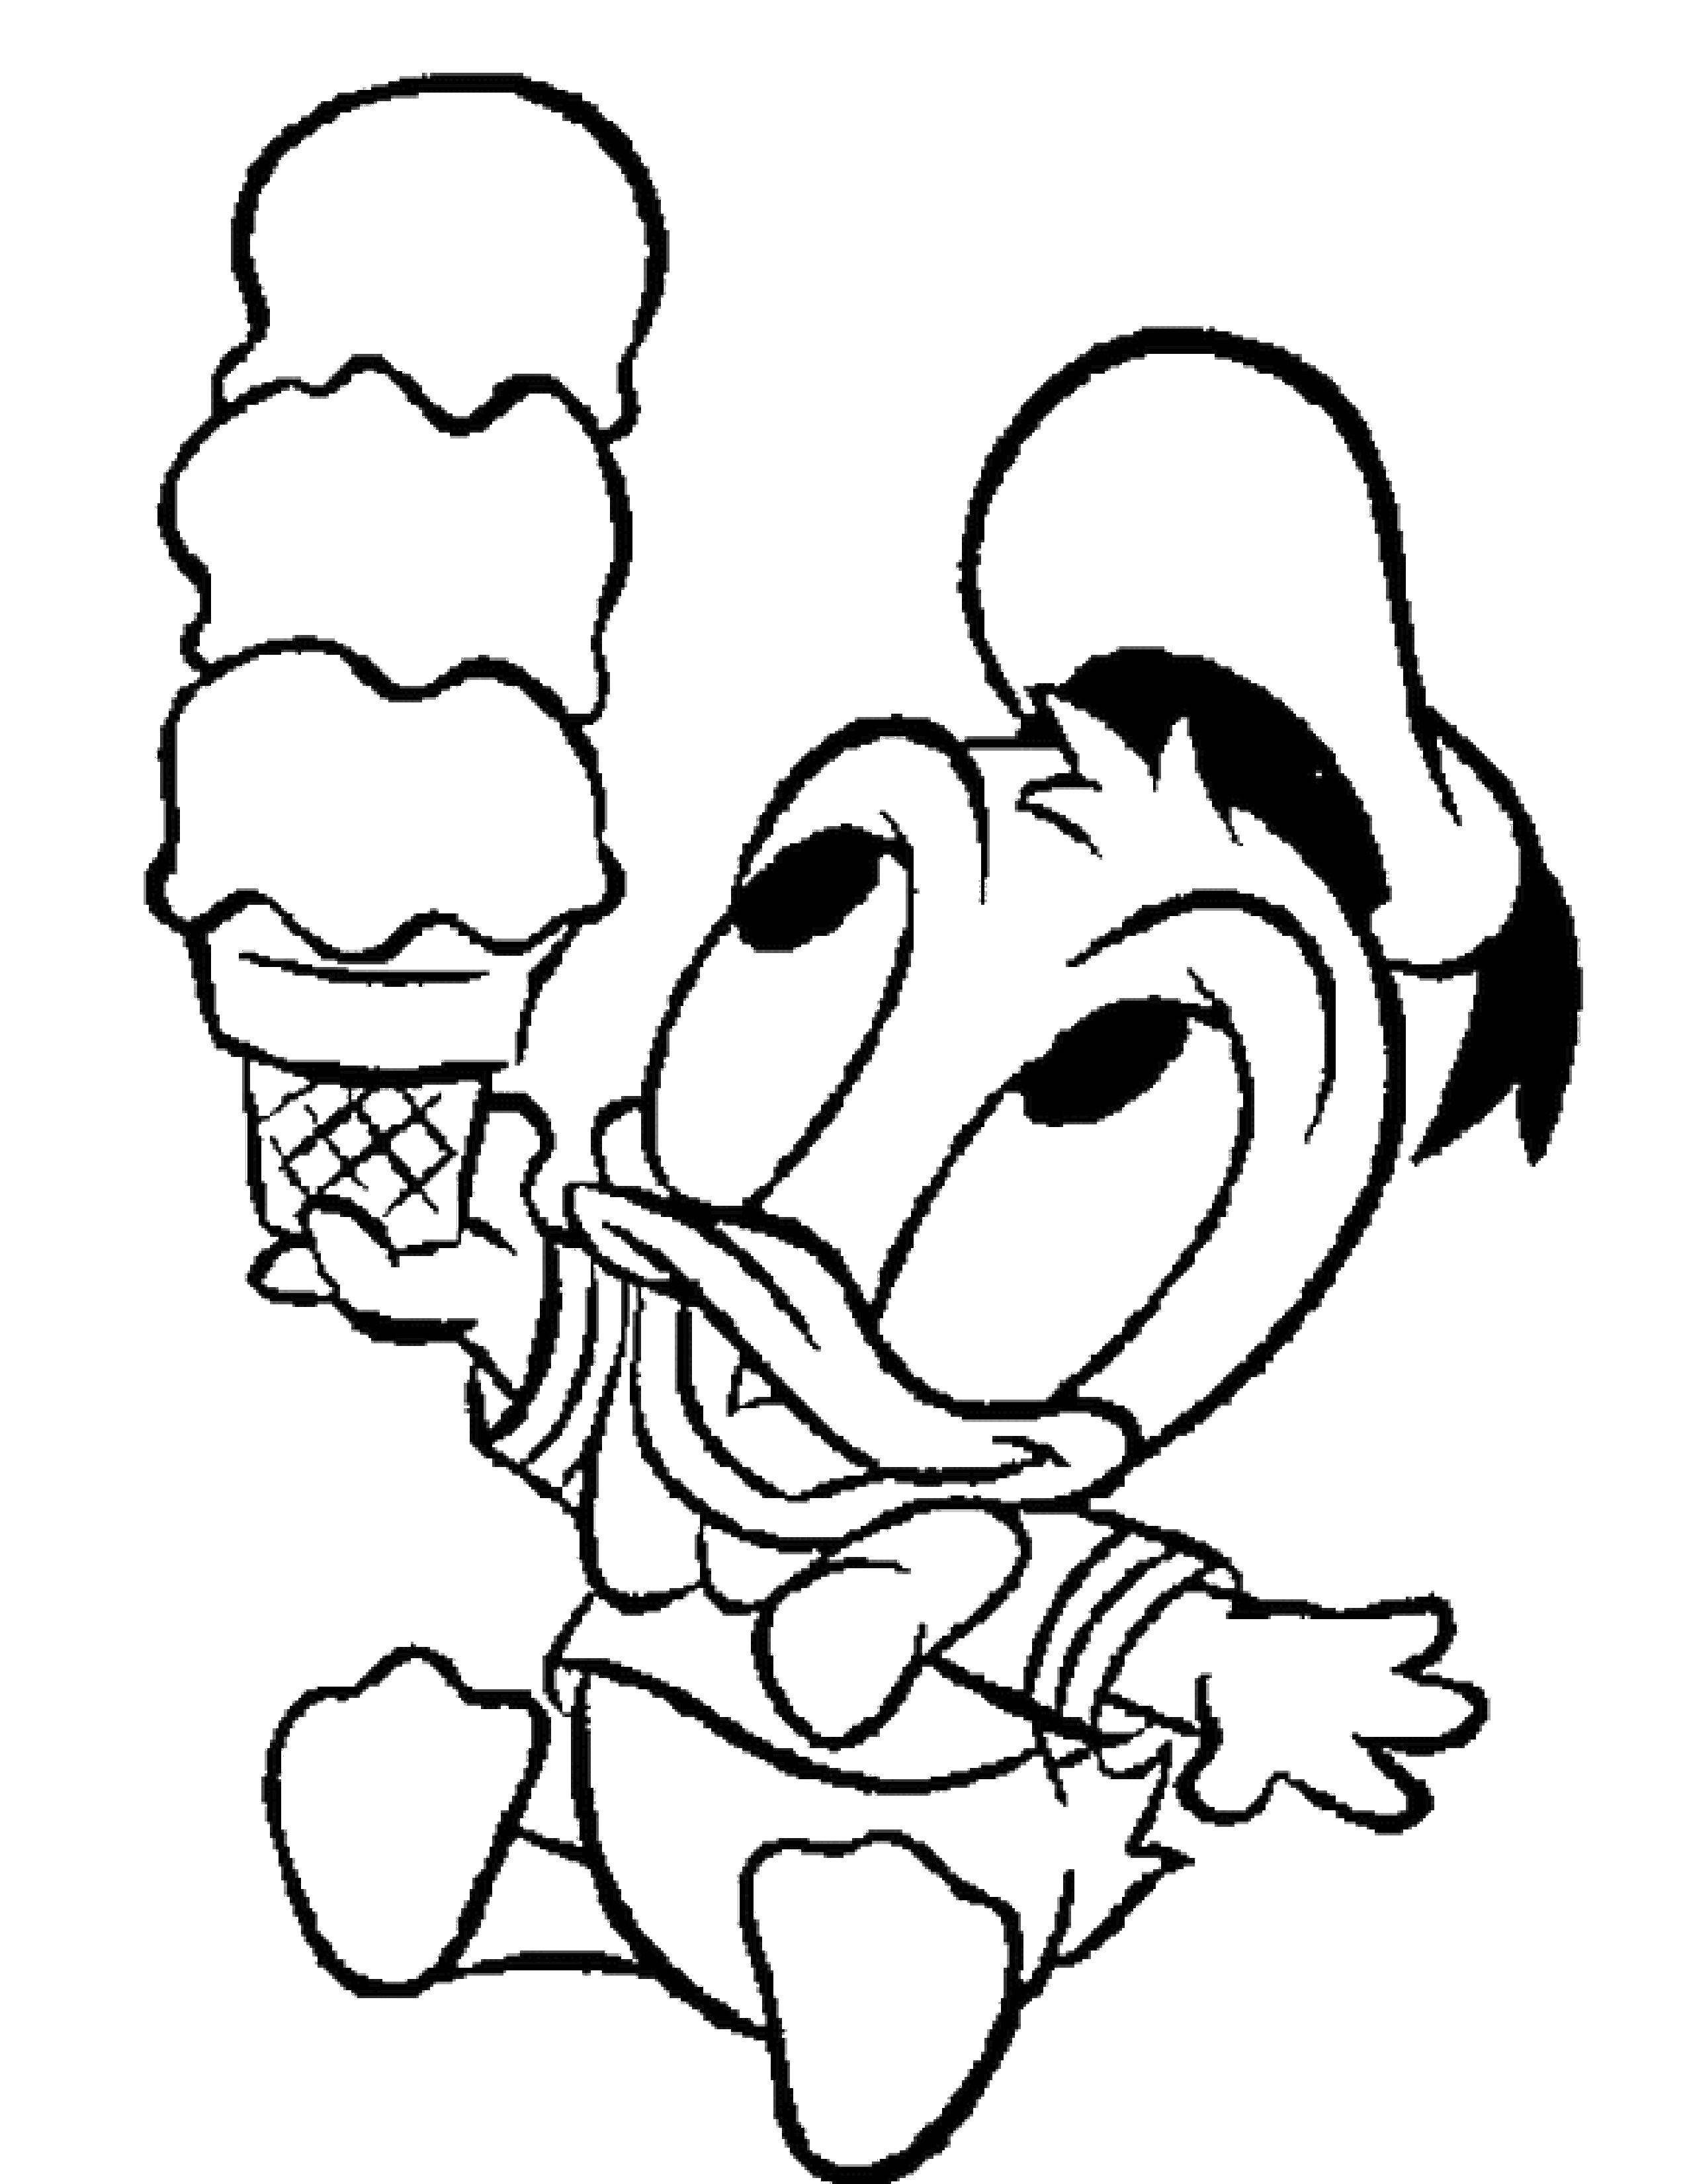 Coloring Nephews of Donald. Category Disney coloring pages. Tags:  Disney, Ducktales, Donald Duck.